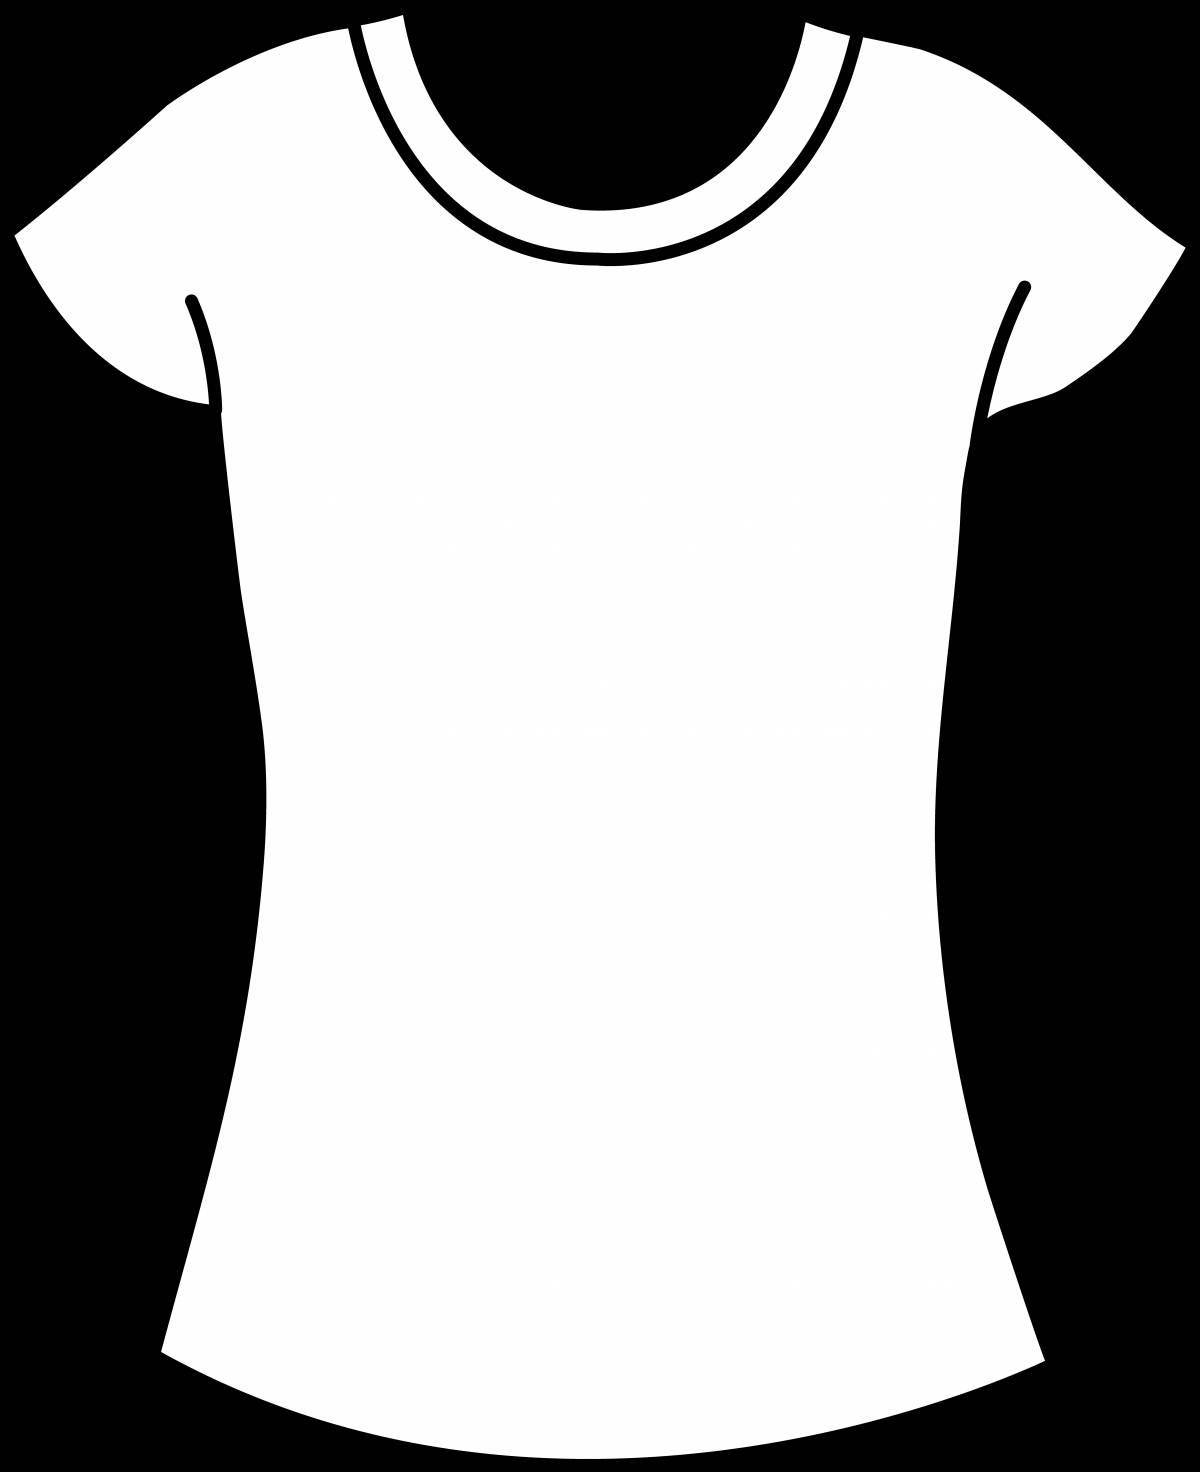 Amazing t-shirt coloring page